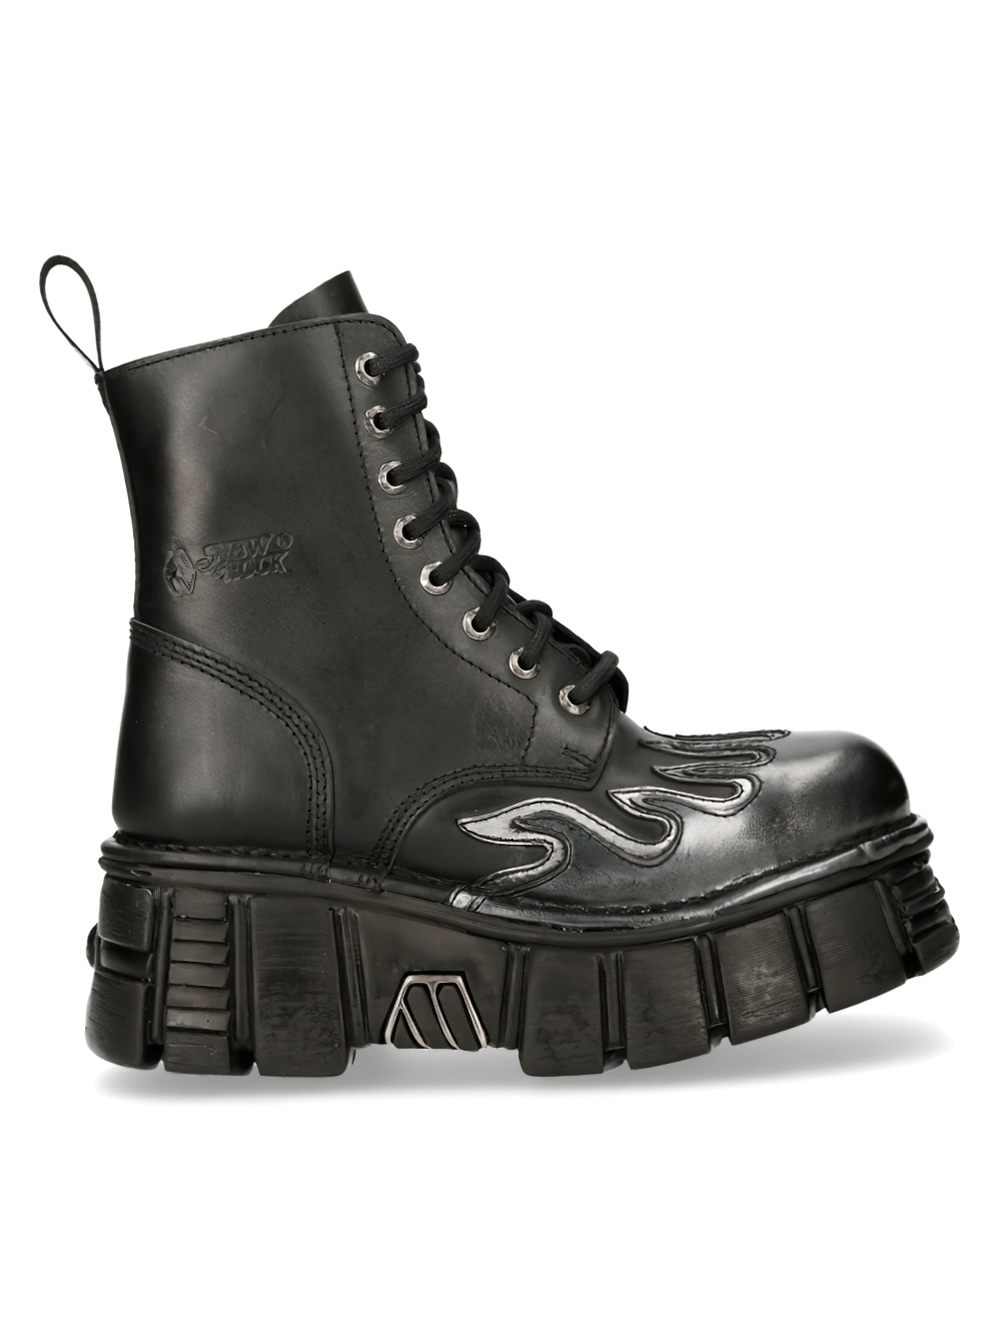 NEW ROCK Military-Style Ankle Boots with Metal Accents